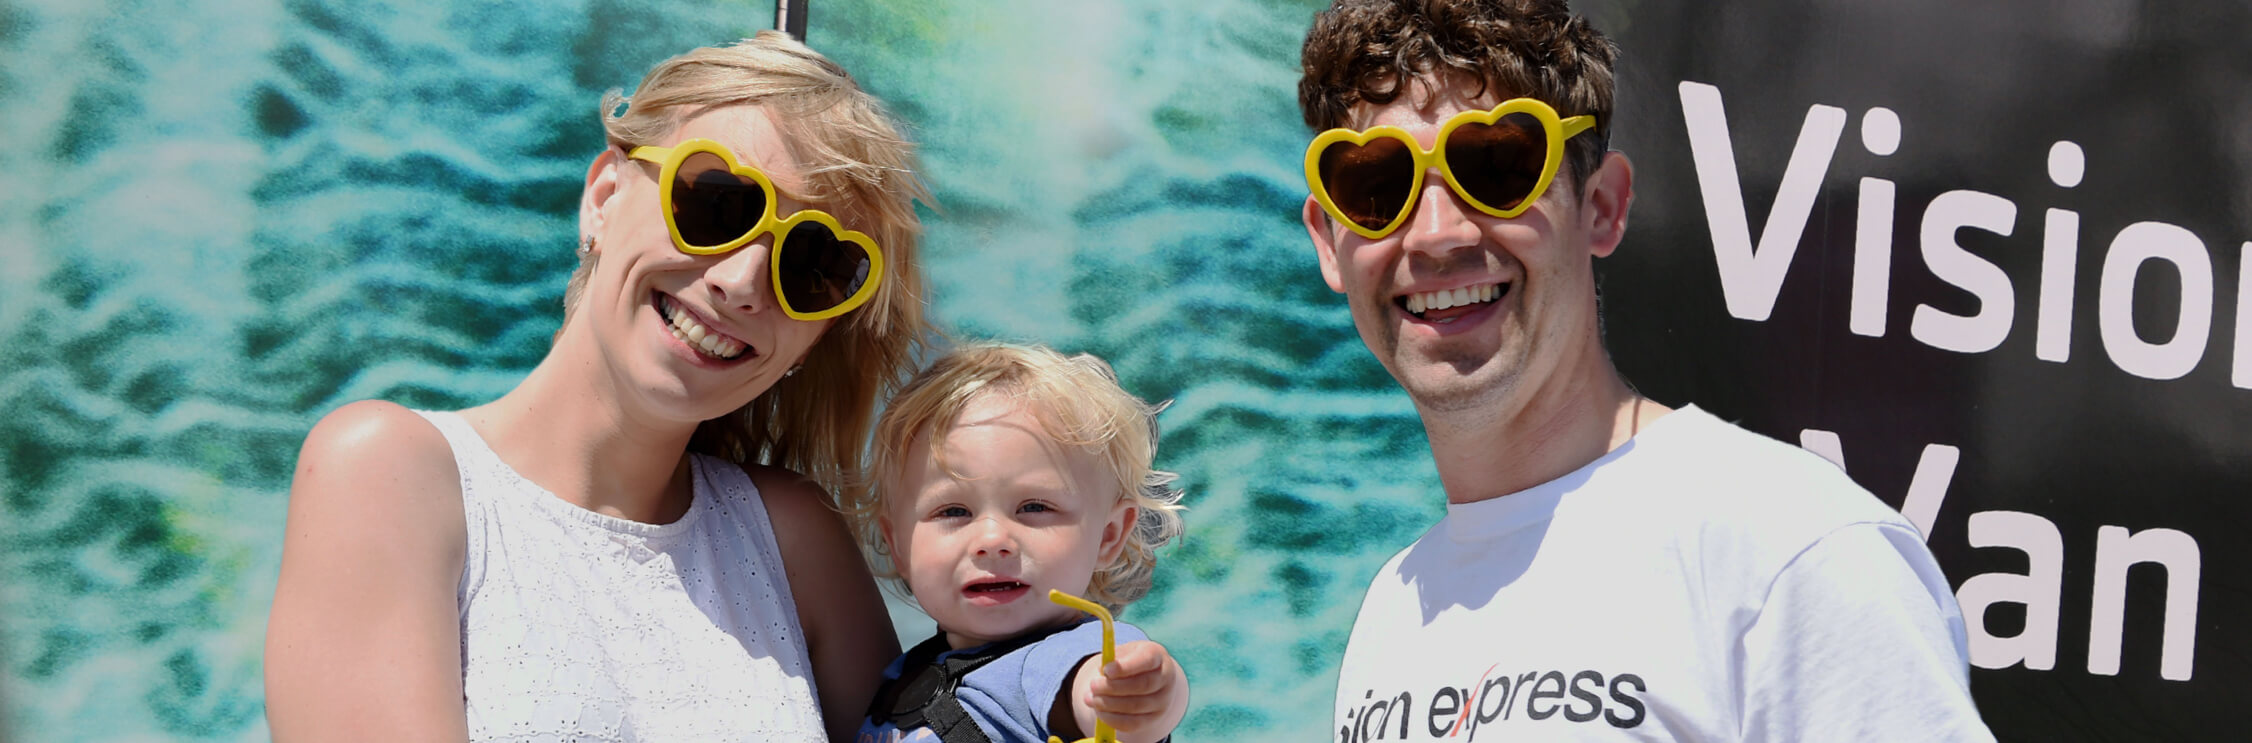 Young man, woman and child wearing yellow heart-shaped sunglasses outside the Vision Express Vision Van.